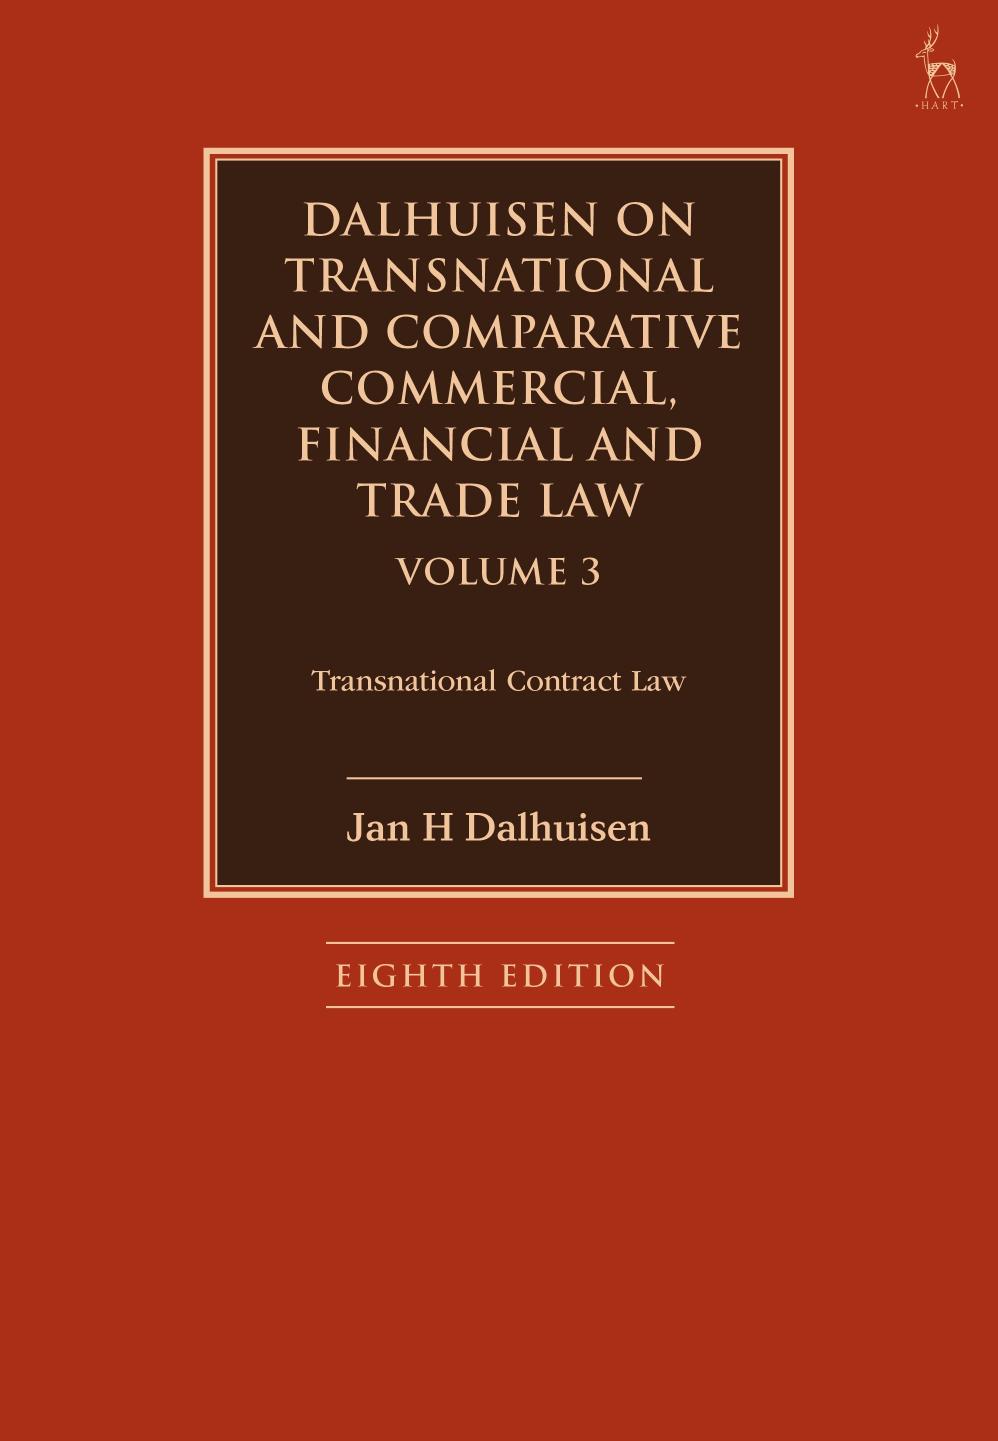 Dalhuisen on Transnational and Comparative Commercial, Financial and Trade Law Volume Volume 3: Transnational Contract Law by Jan H Dalhuisen